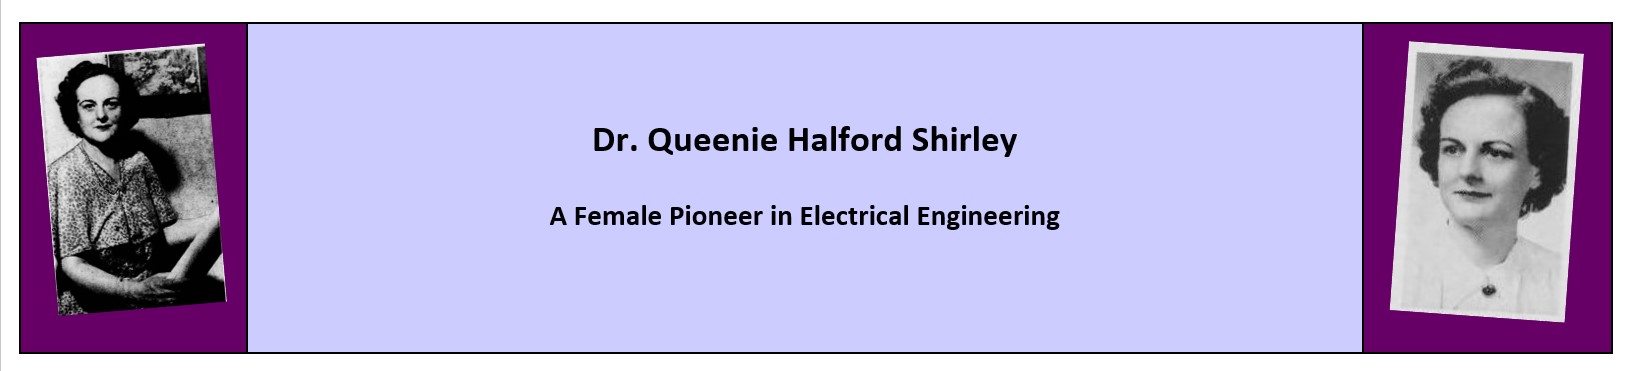 Dr. Queenie Halford Shirley: A Female Pioneer in Electrical Engineering